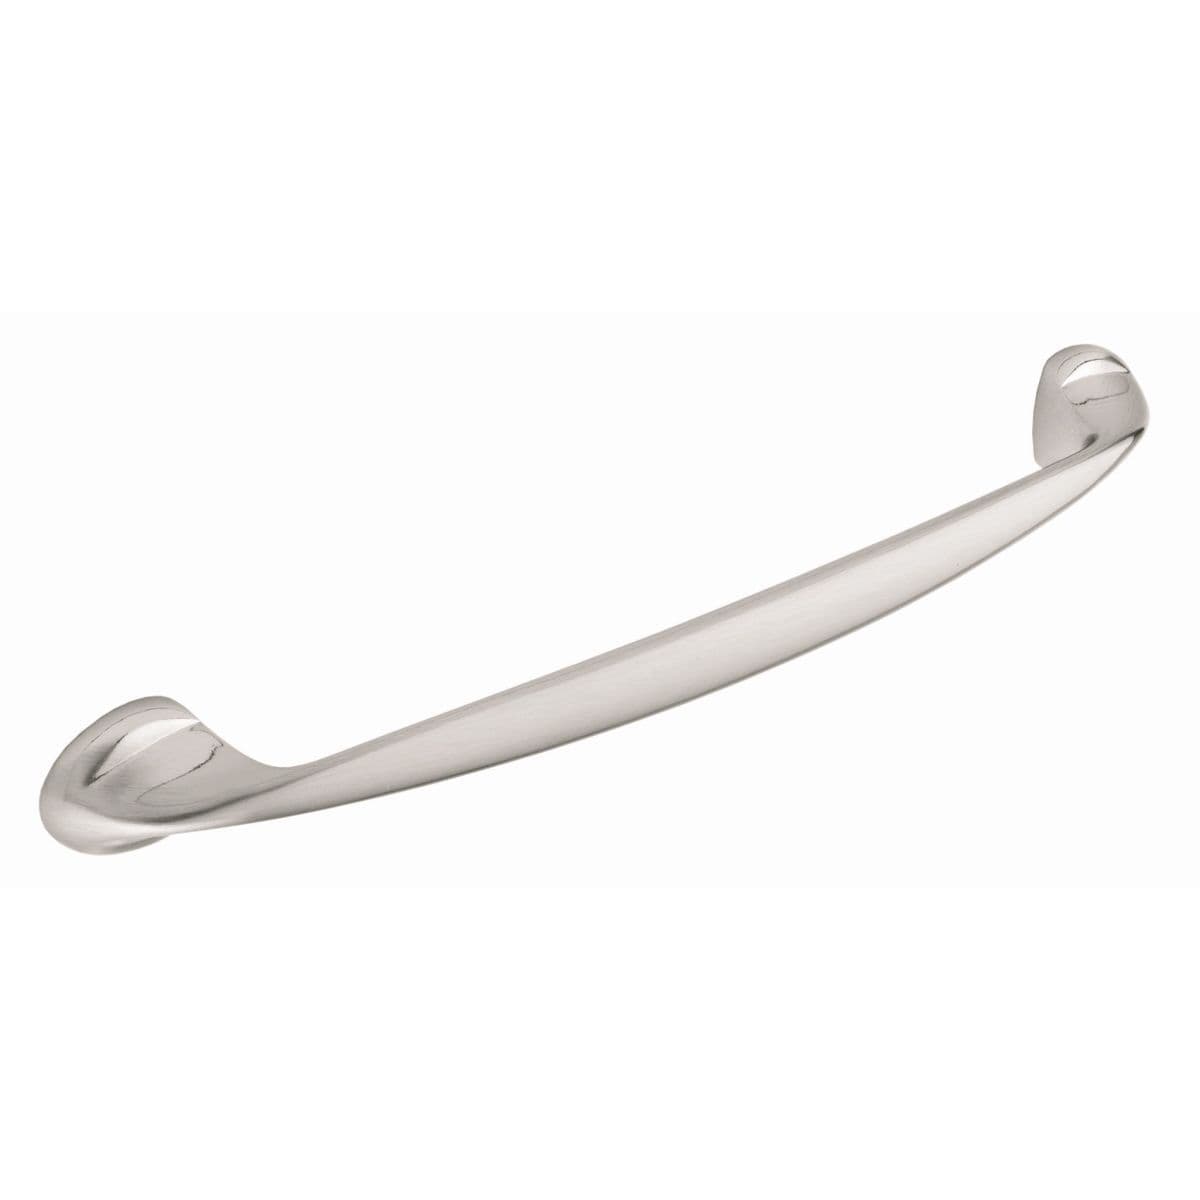 WINTON D Cupboard Handle - 160mm h/c size - BRUSHED STAINLESS STEEL EFFECT finish (PWS 8/963.A.SS)